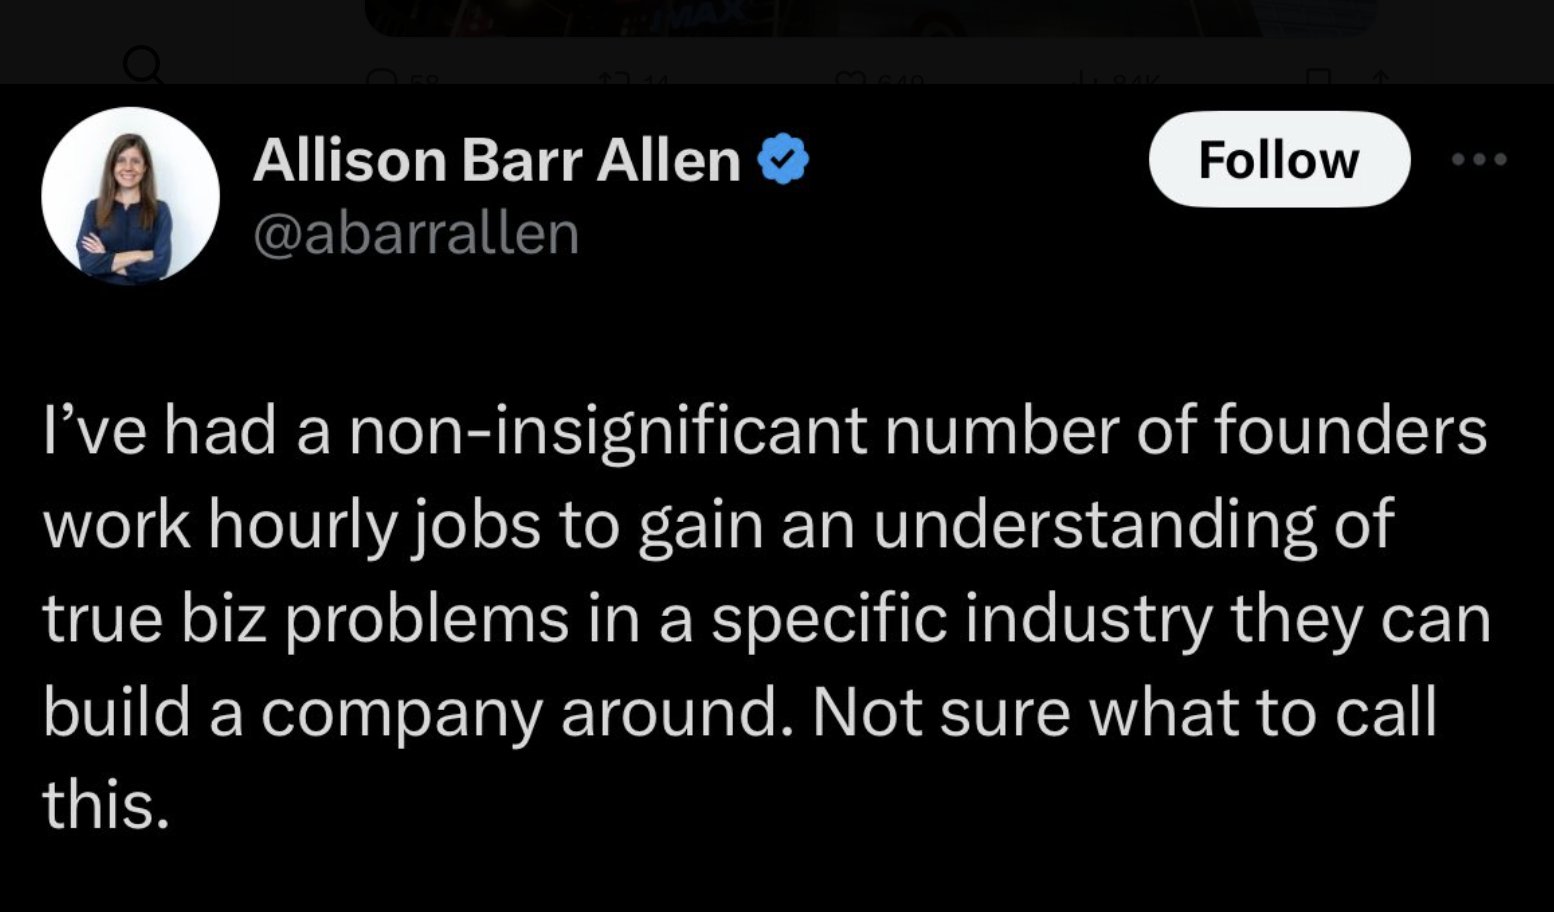 screenshot - 2744 Allison Barr Allen I've had a noninsignificant number of founders work hourly jobs to gain an understanding of true biz problems in a specific industry they can build a company around. Not sure what to call this.